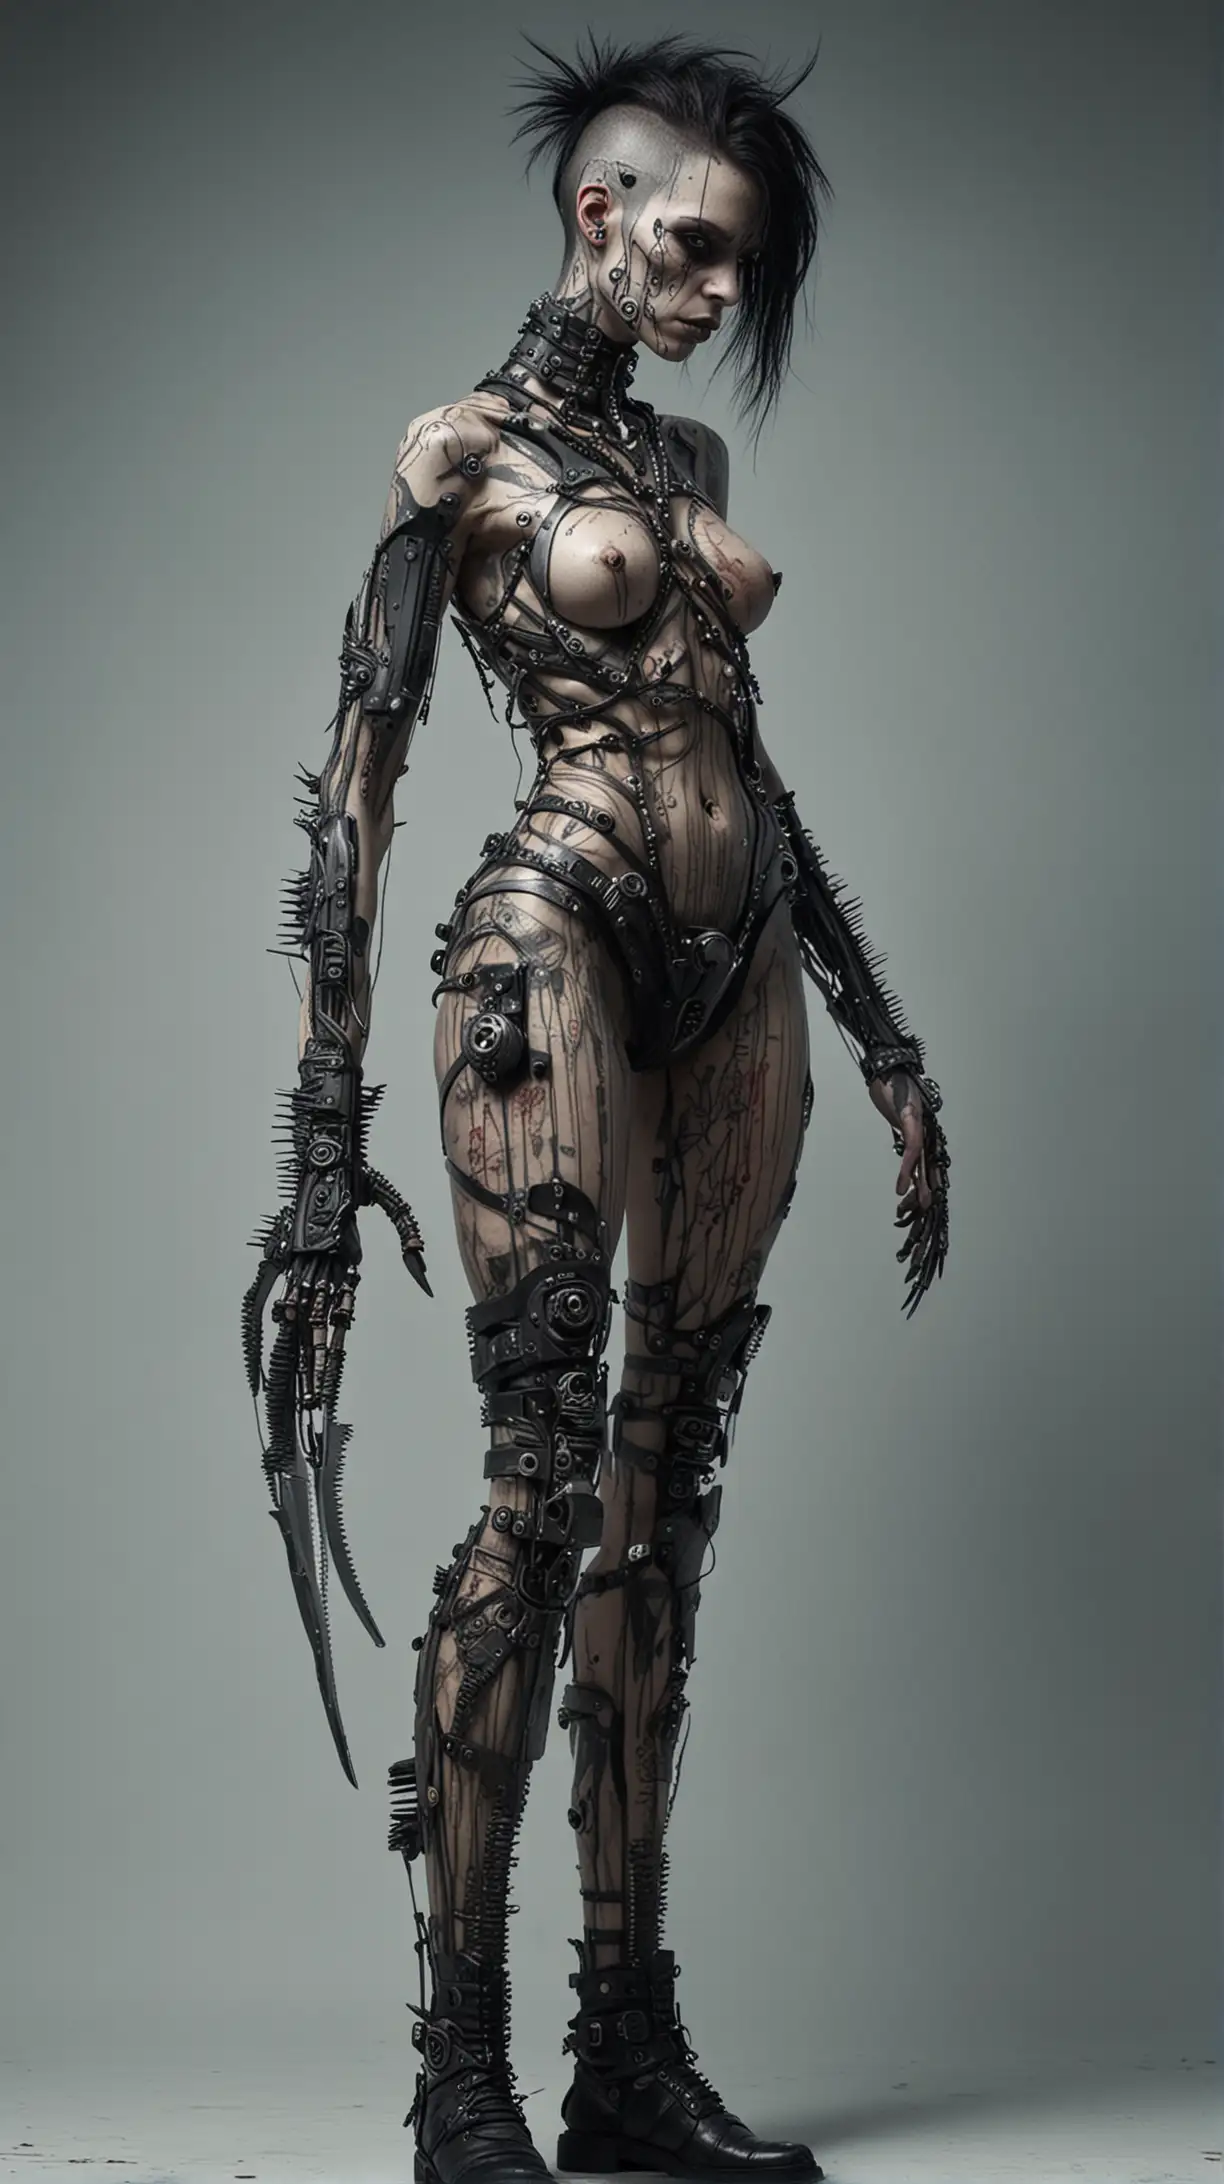 Grotesque Androgynous Cyberpunk with Body Modifications and Buzz Saw Arm